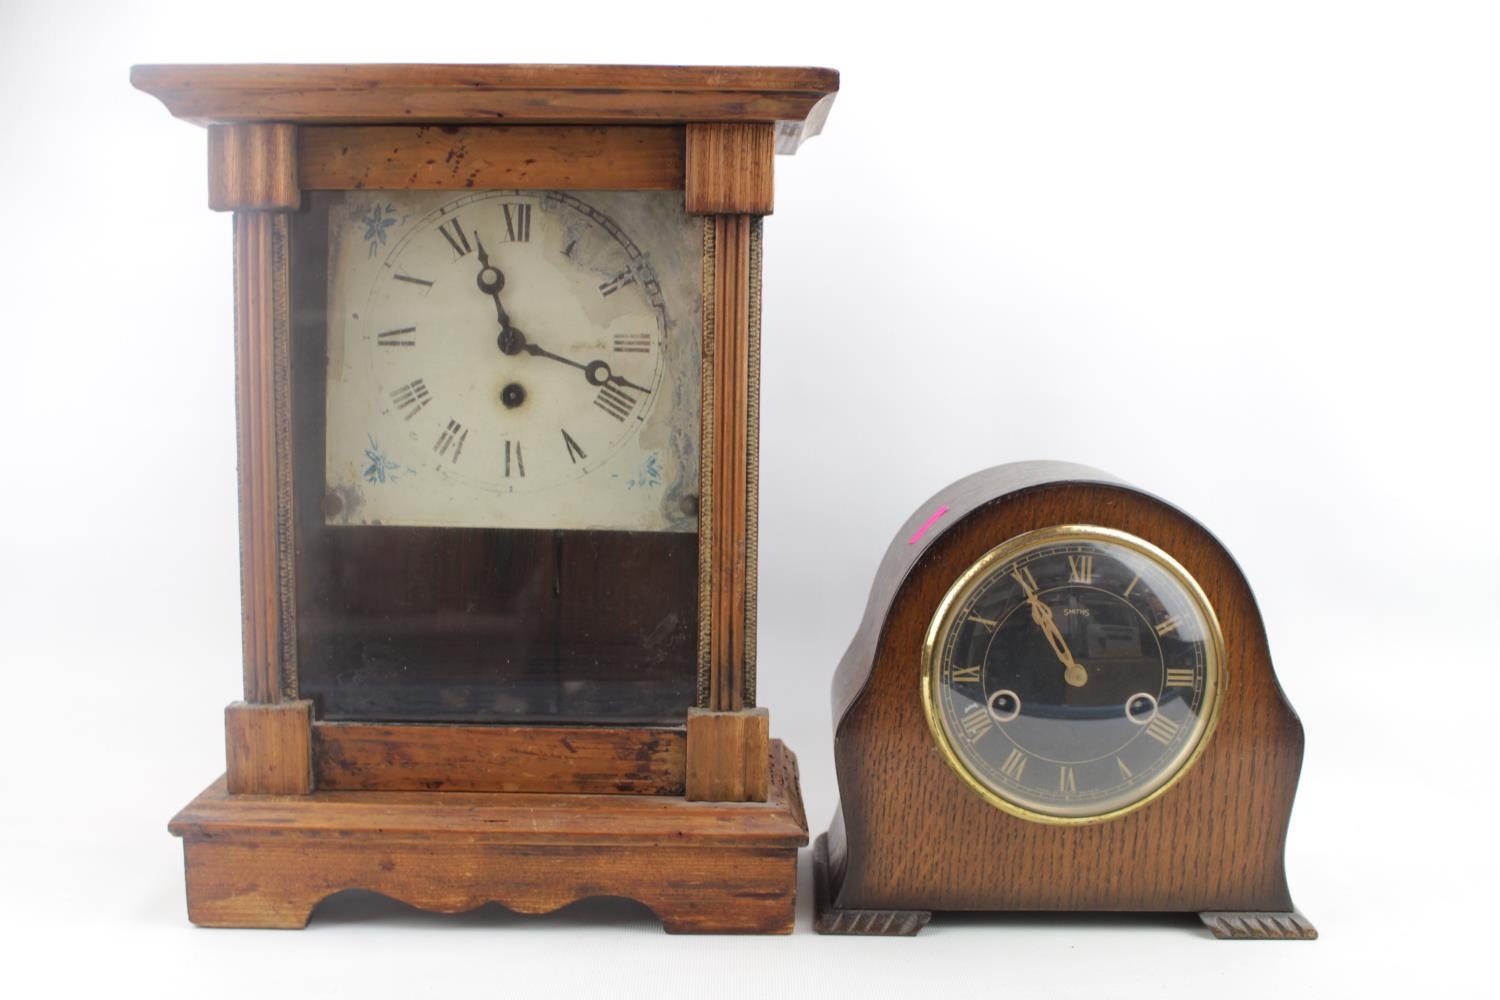 Smiths oak cased mantel clock and a Early 20thC Cased mantel clock